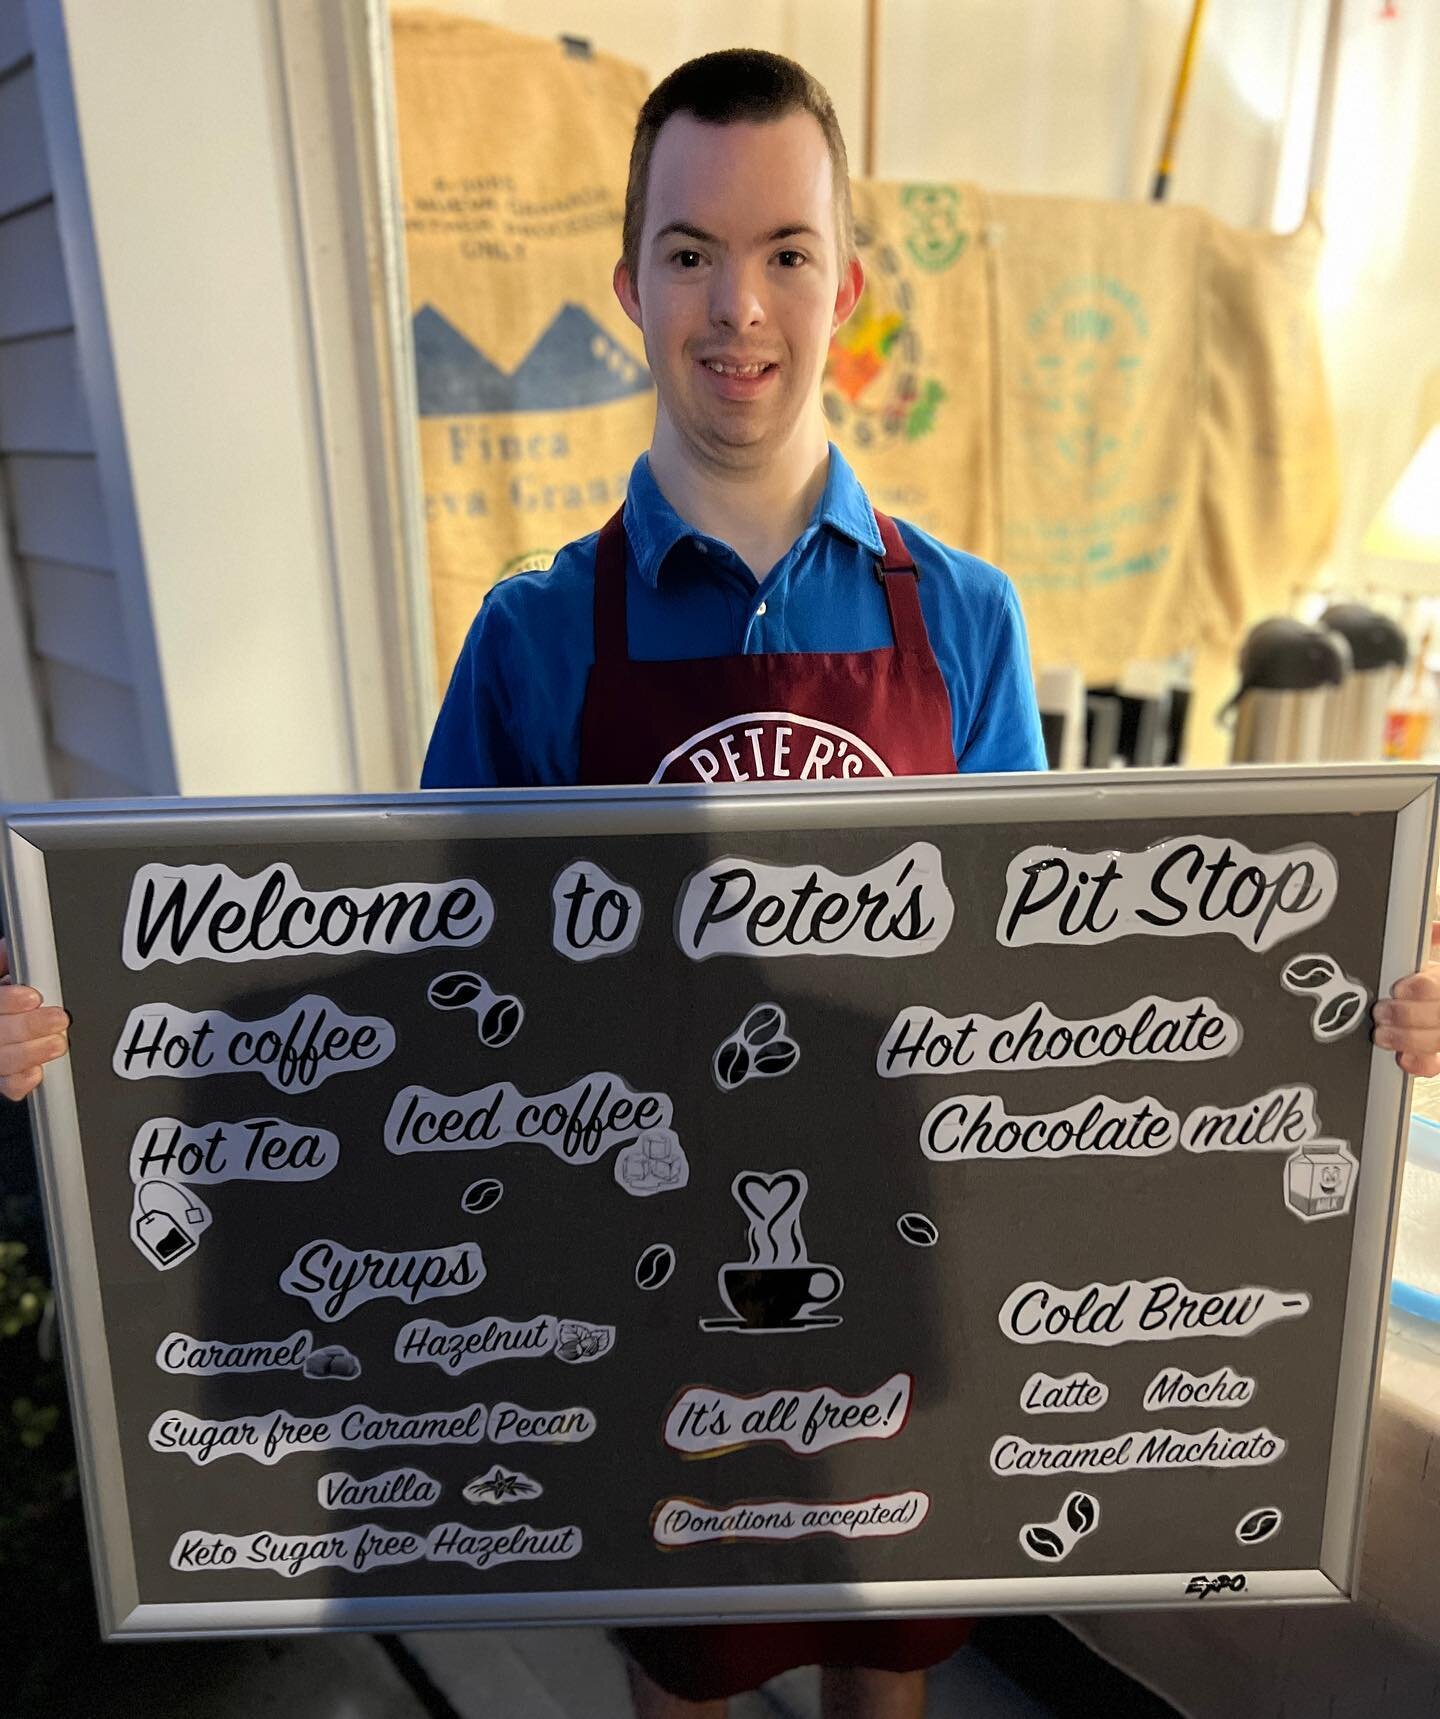 Welcome to Monday from Peter&rsquo;s Pit Stop! We are open as usual with an updated menu. Love to serve you soon! #PetersPitStop
#Meridianatlakesofcanebay
#Canebayplantation
#icecoffee
#hotcoffee
#coastalcoffeeroasters
#coffeeflavors
#specialcoffeefr